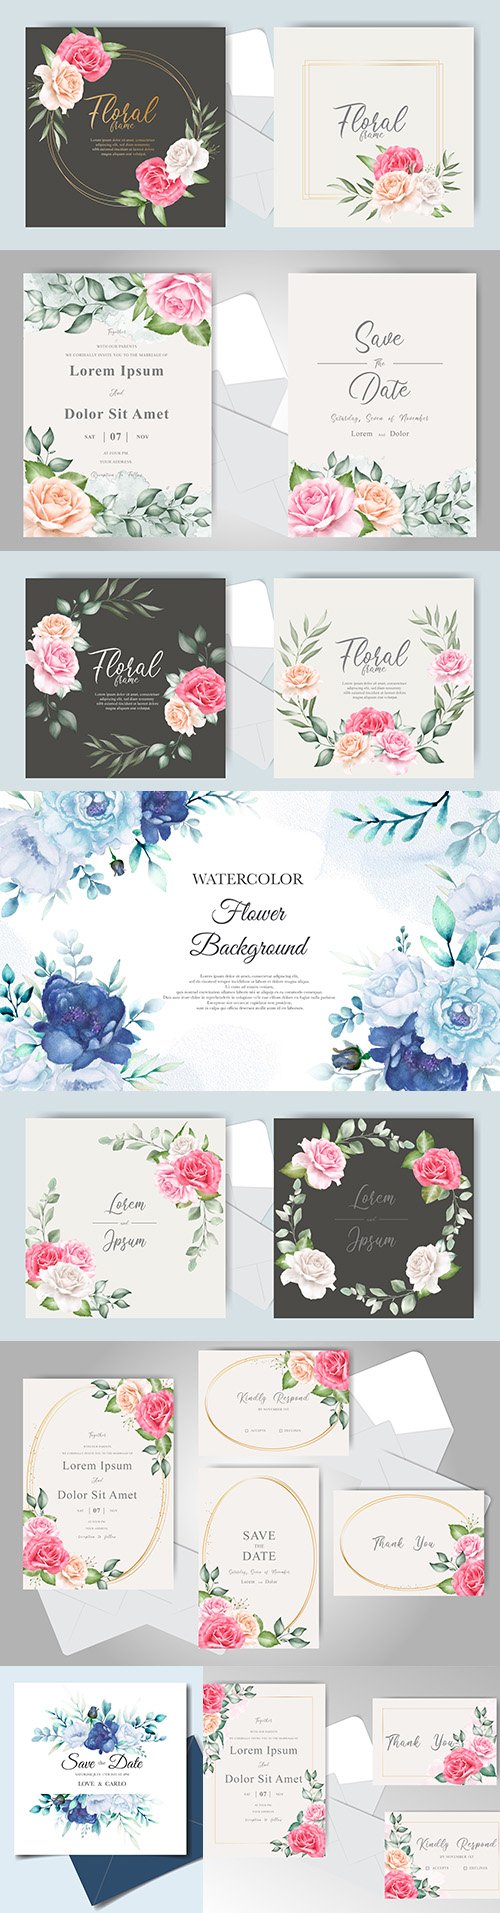 Beautiful wedding invitation card with watercolor flowers and leaves